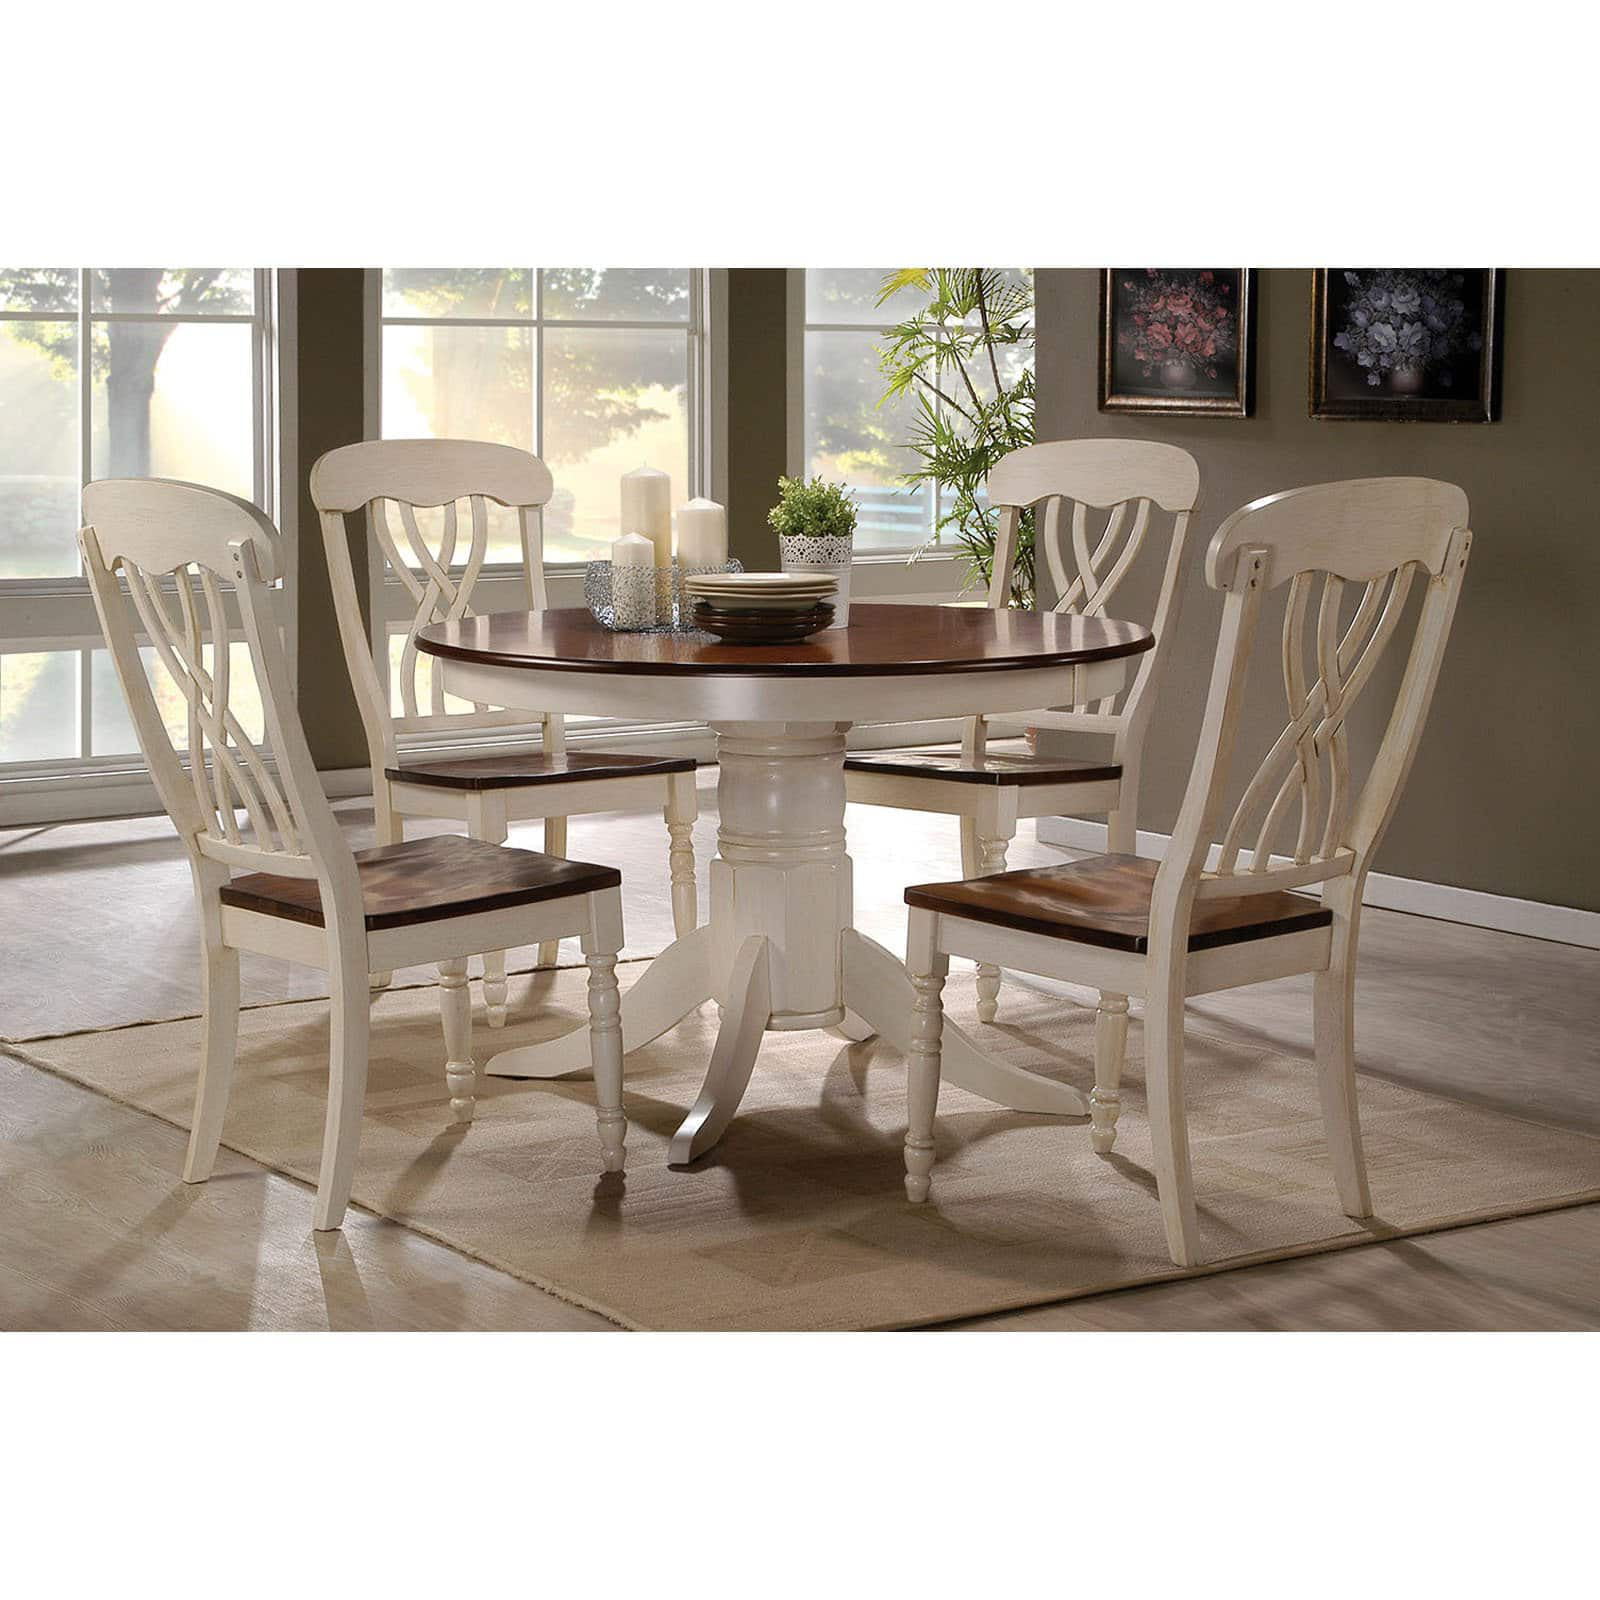 Featured image of post Round Dining Table Set For 5 / Make the choice of wood, length, height.